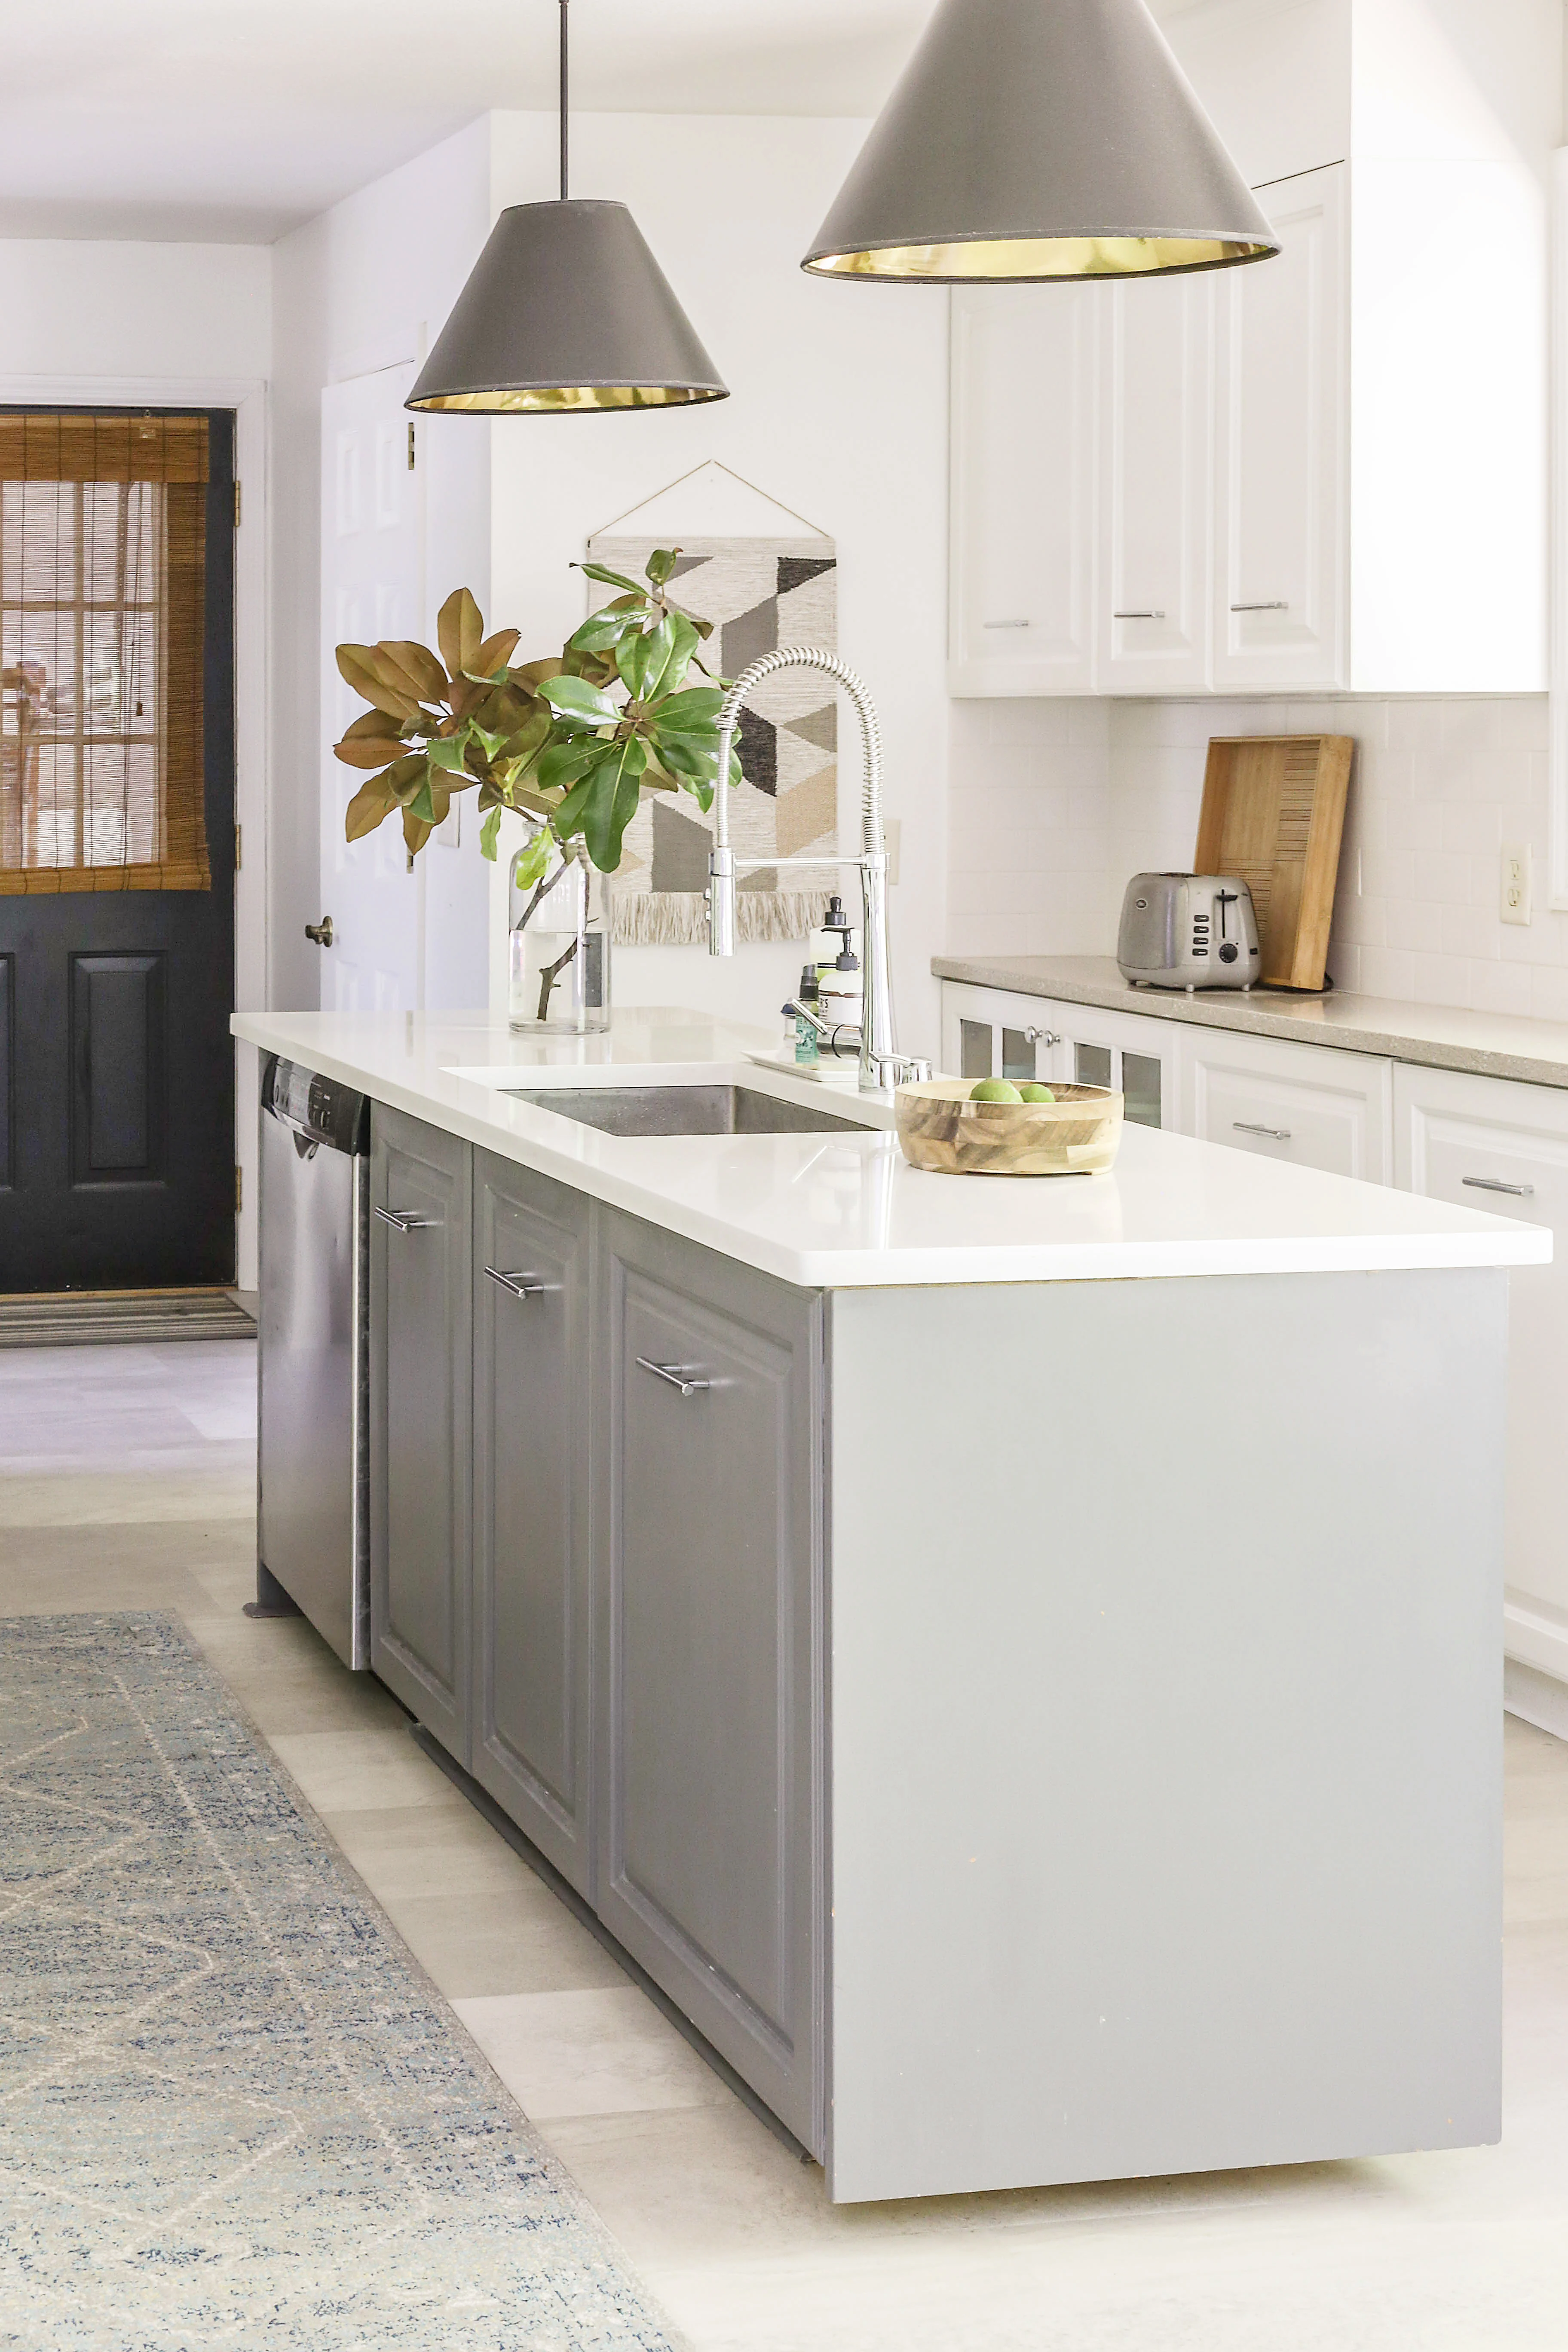 How To Paint Kitchen Cabinets: A DIY Makeover Guide